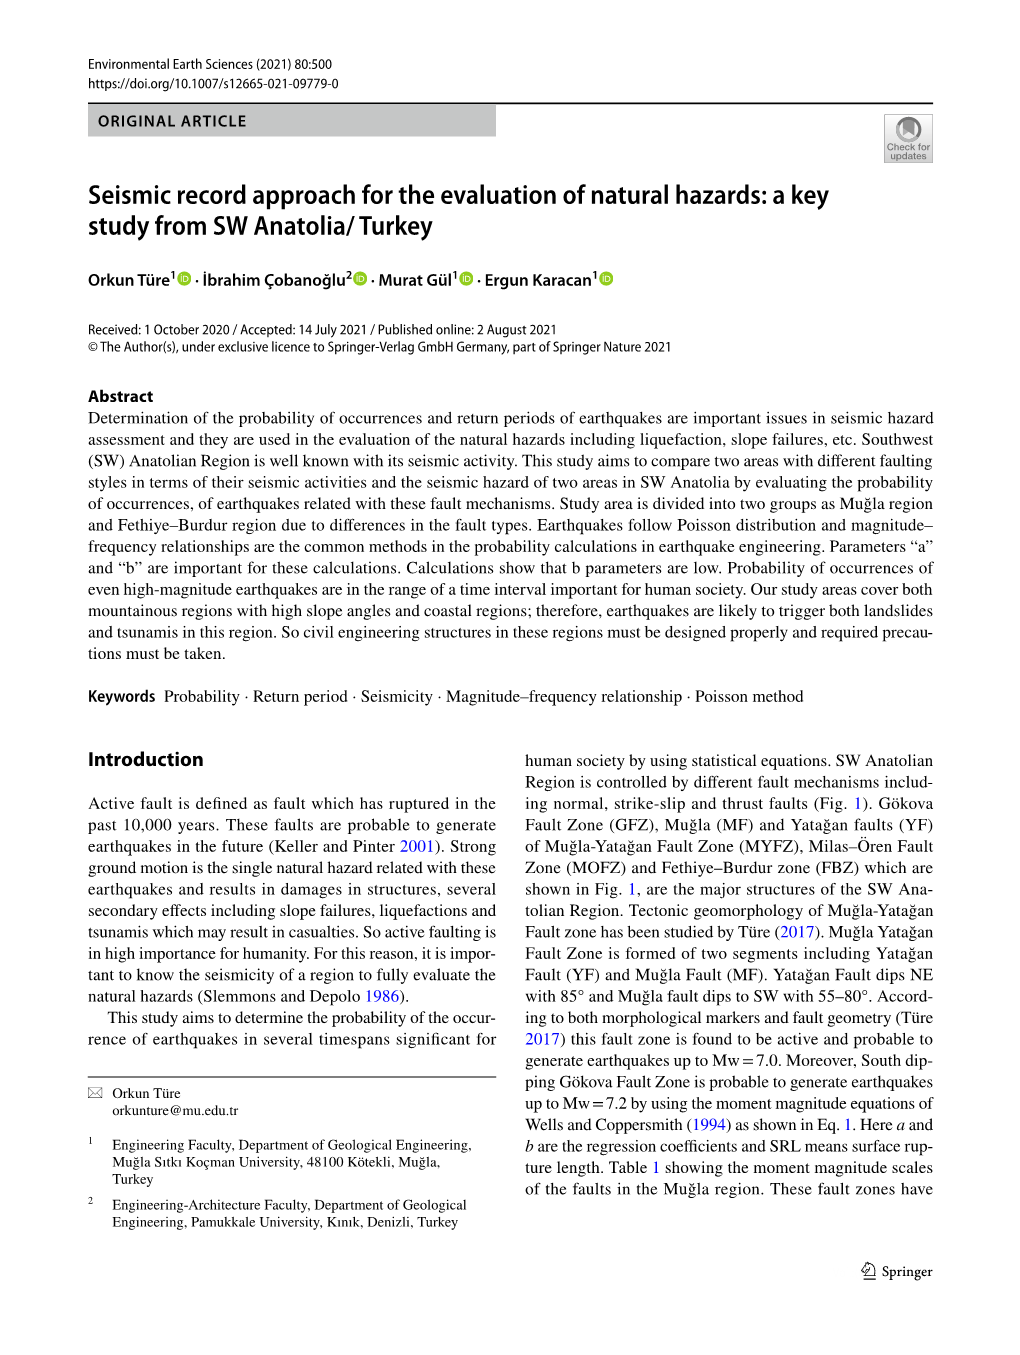 Seismic Record Approach for the Evaluation of Natural Hazards: a Key Study from SW Anatolia/ Turkey